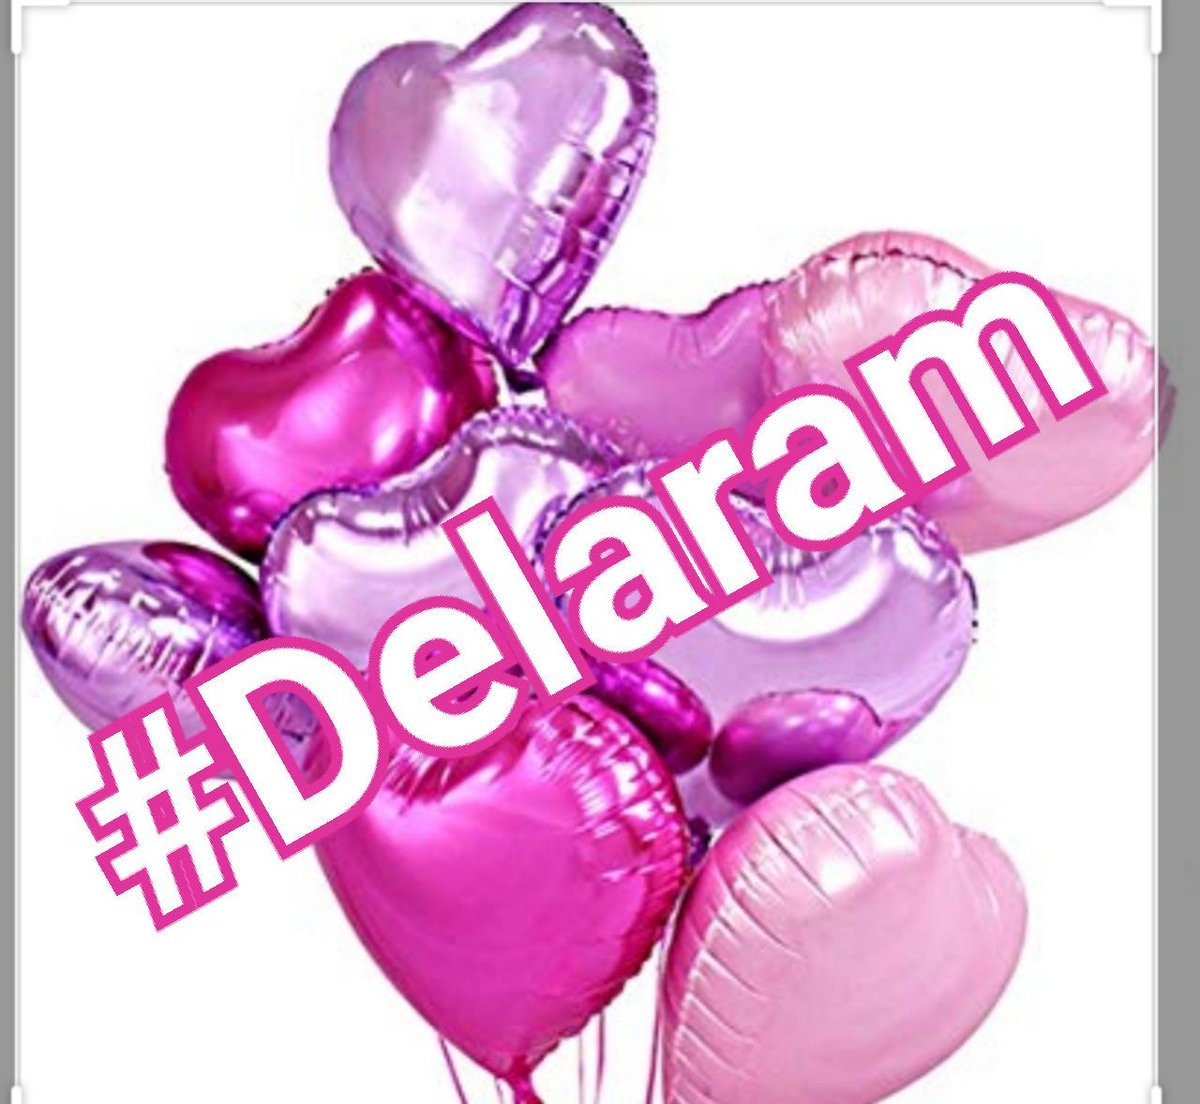 Dear #Delaram 
A special child like you deserves nothing but love and blessings from everyone. Your days should be full of happiness and fulfillment, sweet one.
#SaveDelaram 
#IranianRefugeesInTurkey
#Resettlement4Iranian
@UNHCRTurkey